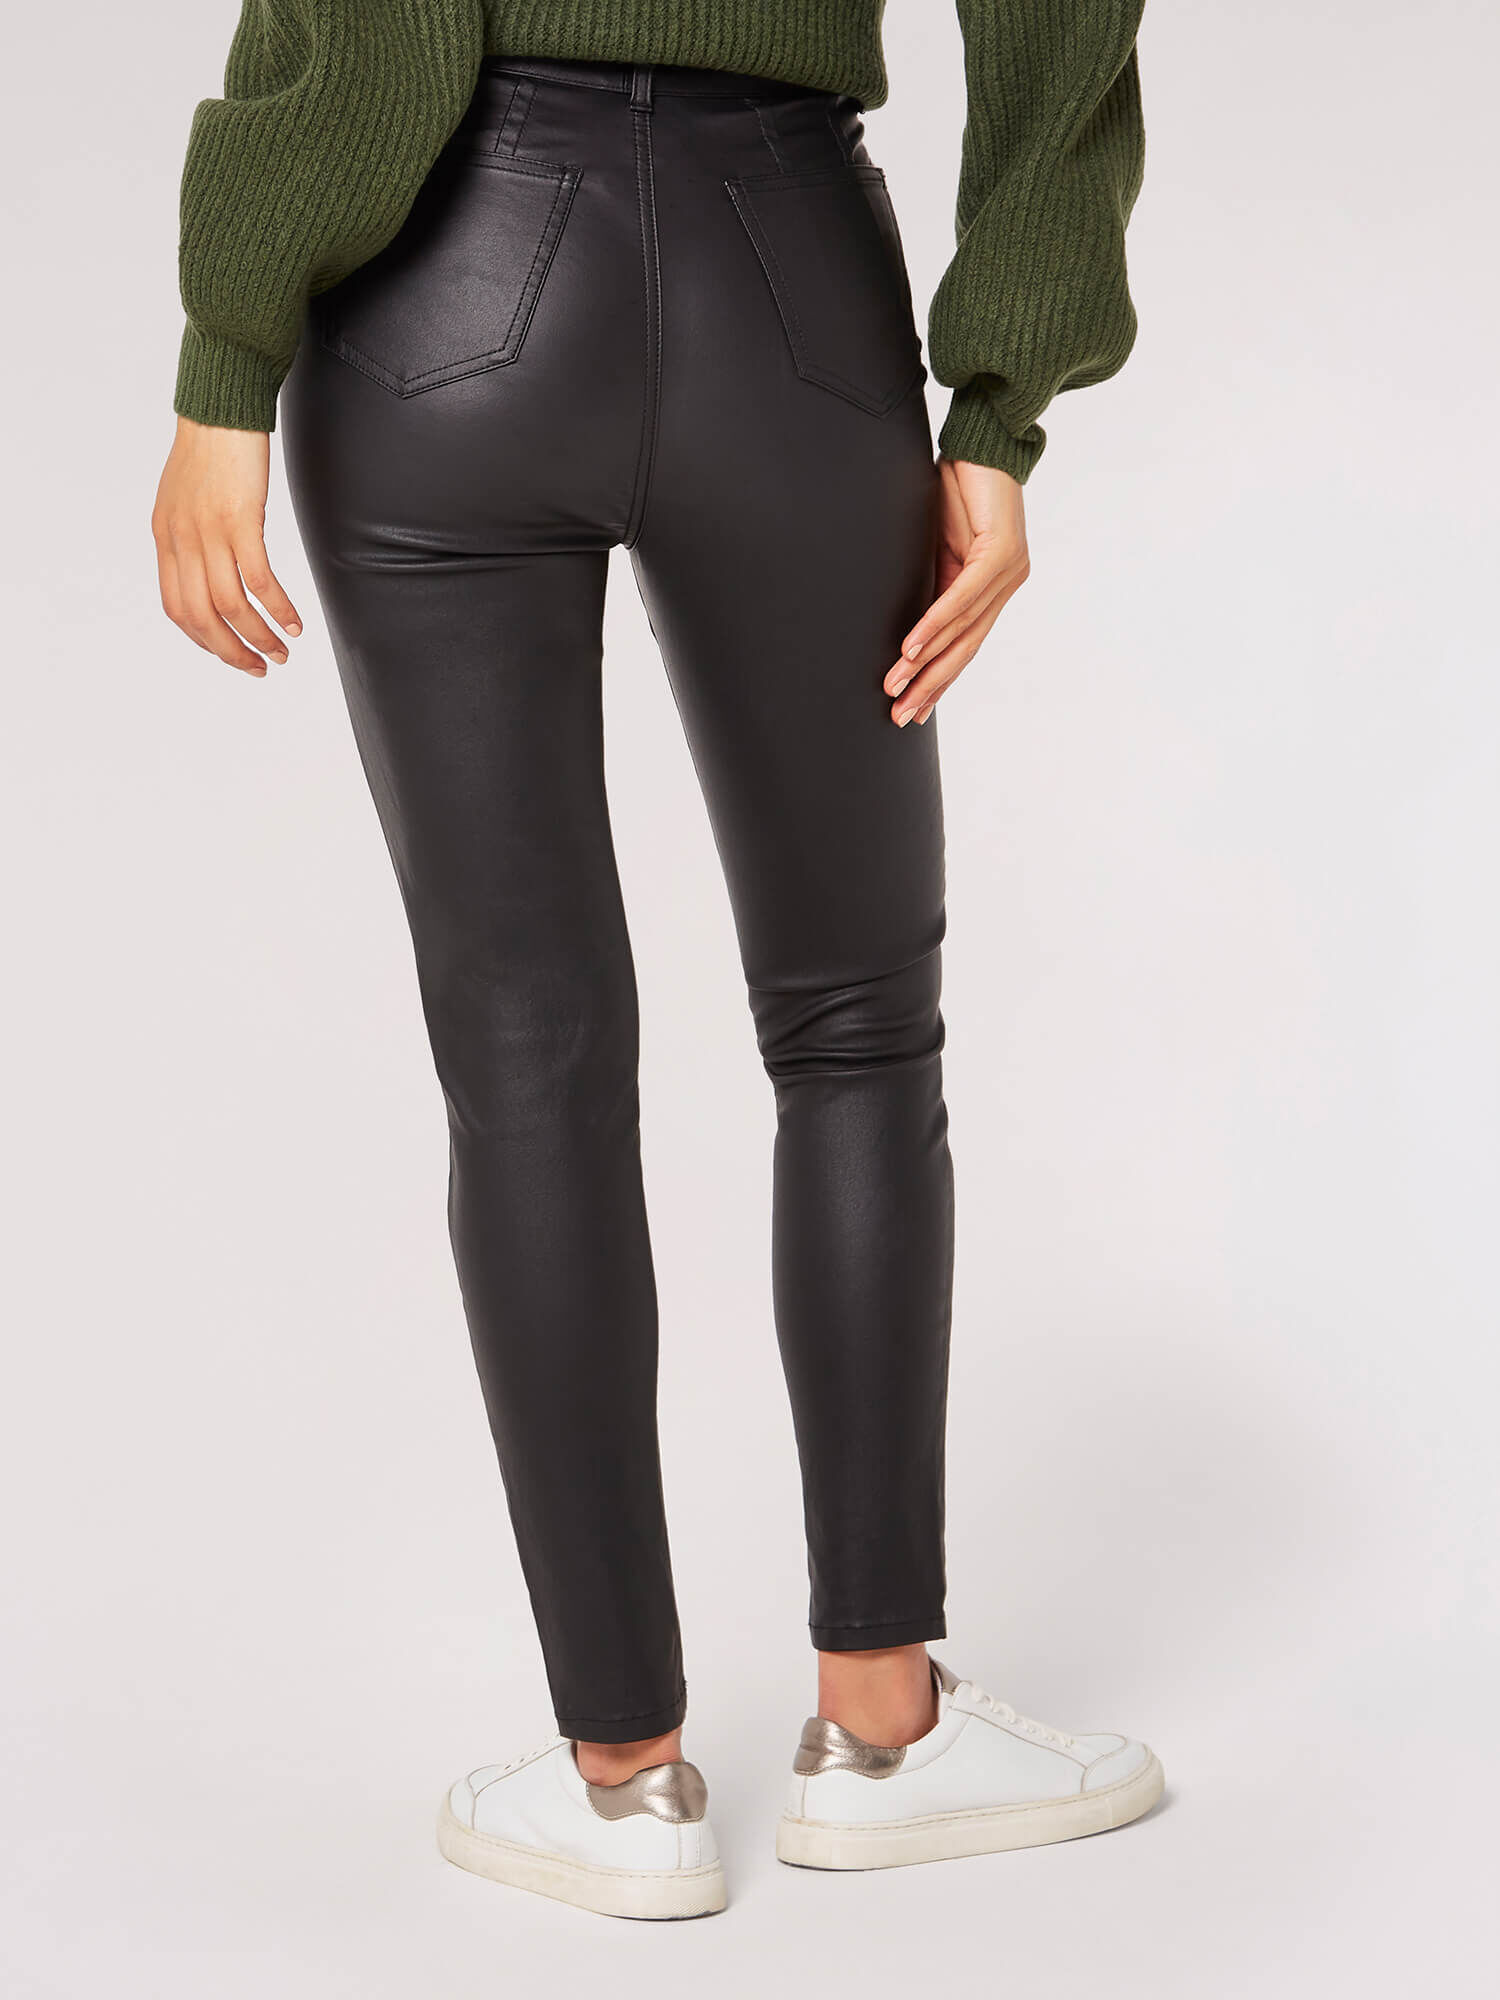 Missguided Agnes Faux Leather Zip Detail Skinny Trousers Black, $60 |  Missguided | Lookastic